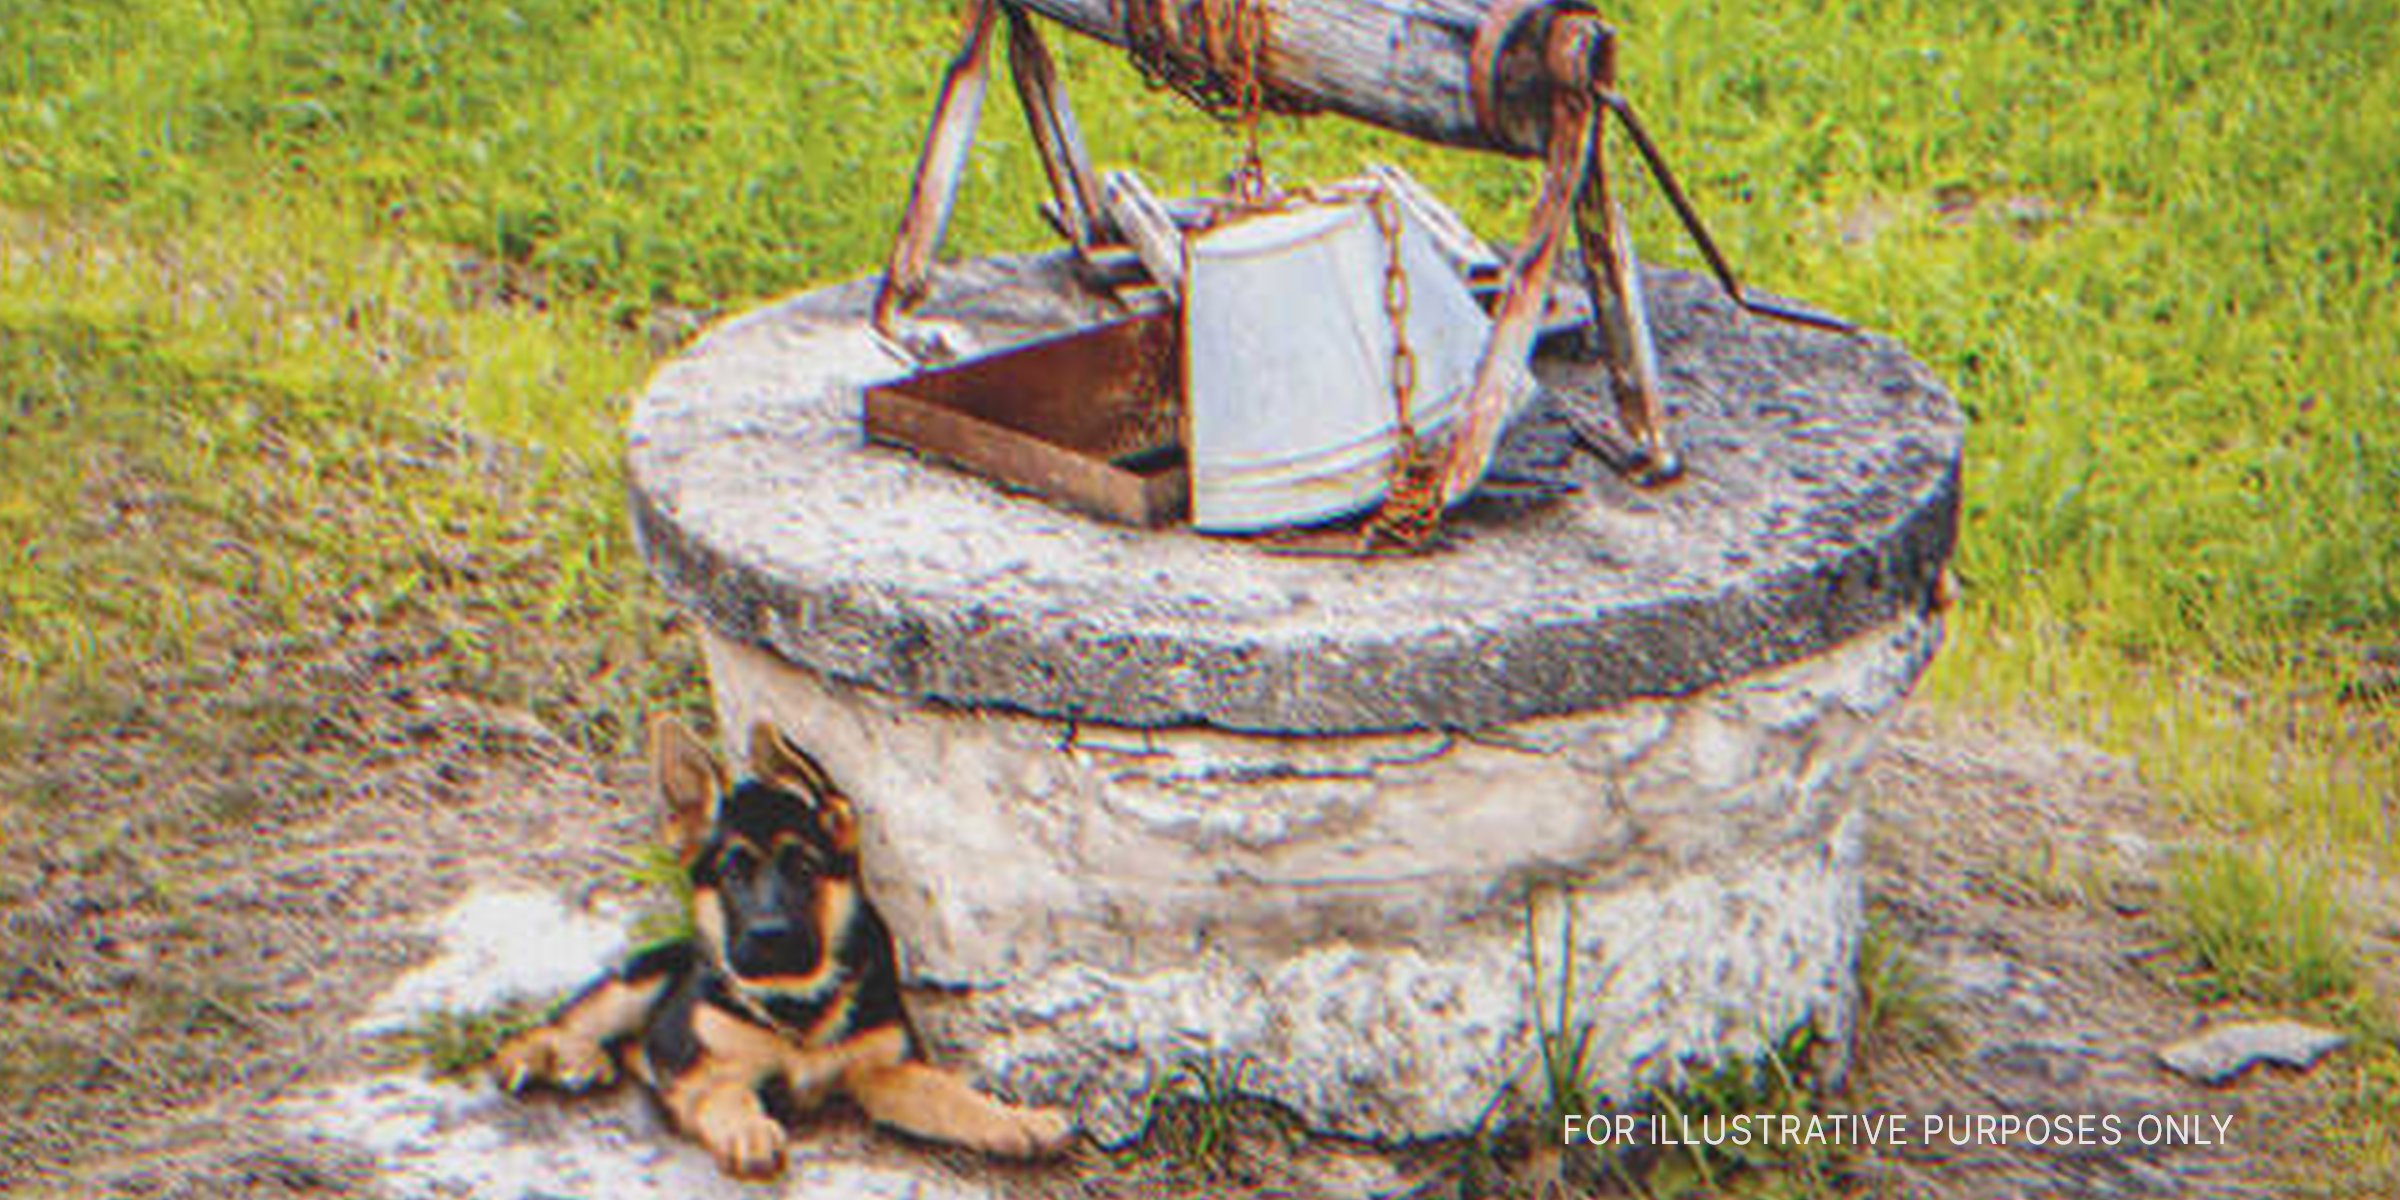 Puppy Sitting Near A Well. | Source: Getty Images